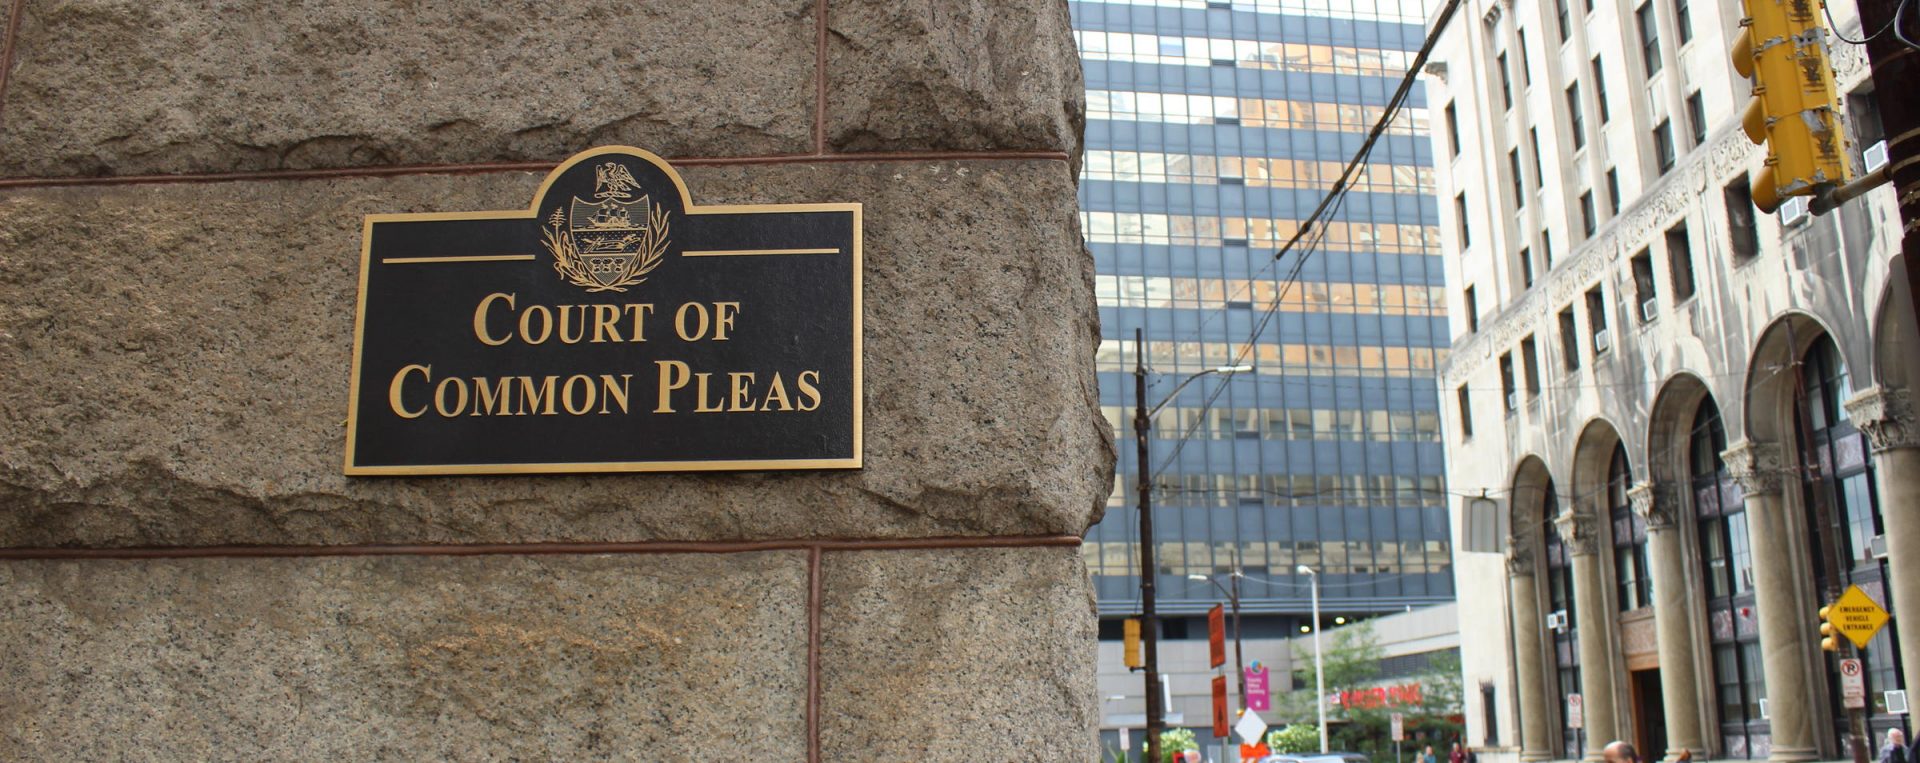 The Allegheny County Court of Common Pleas